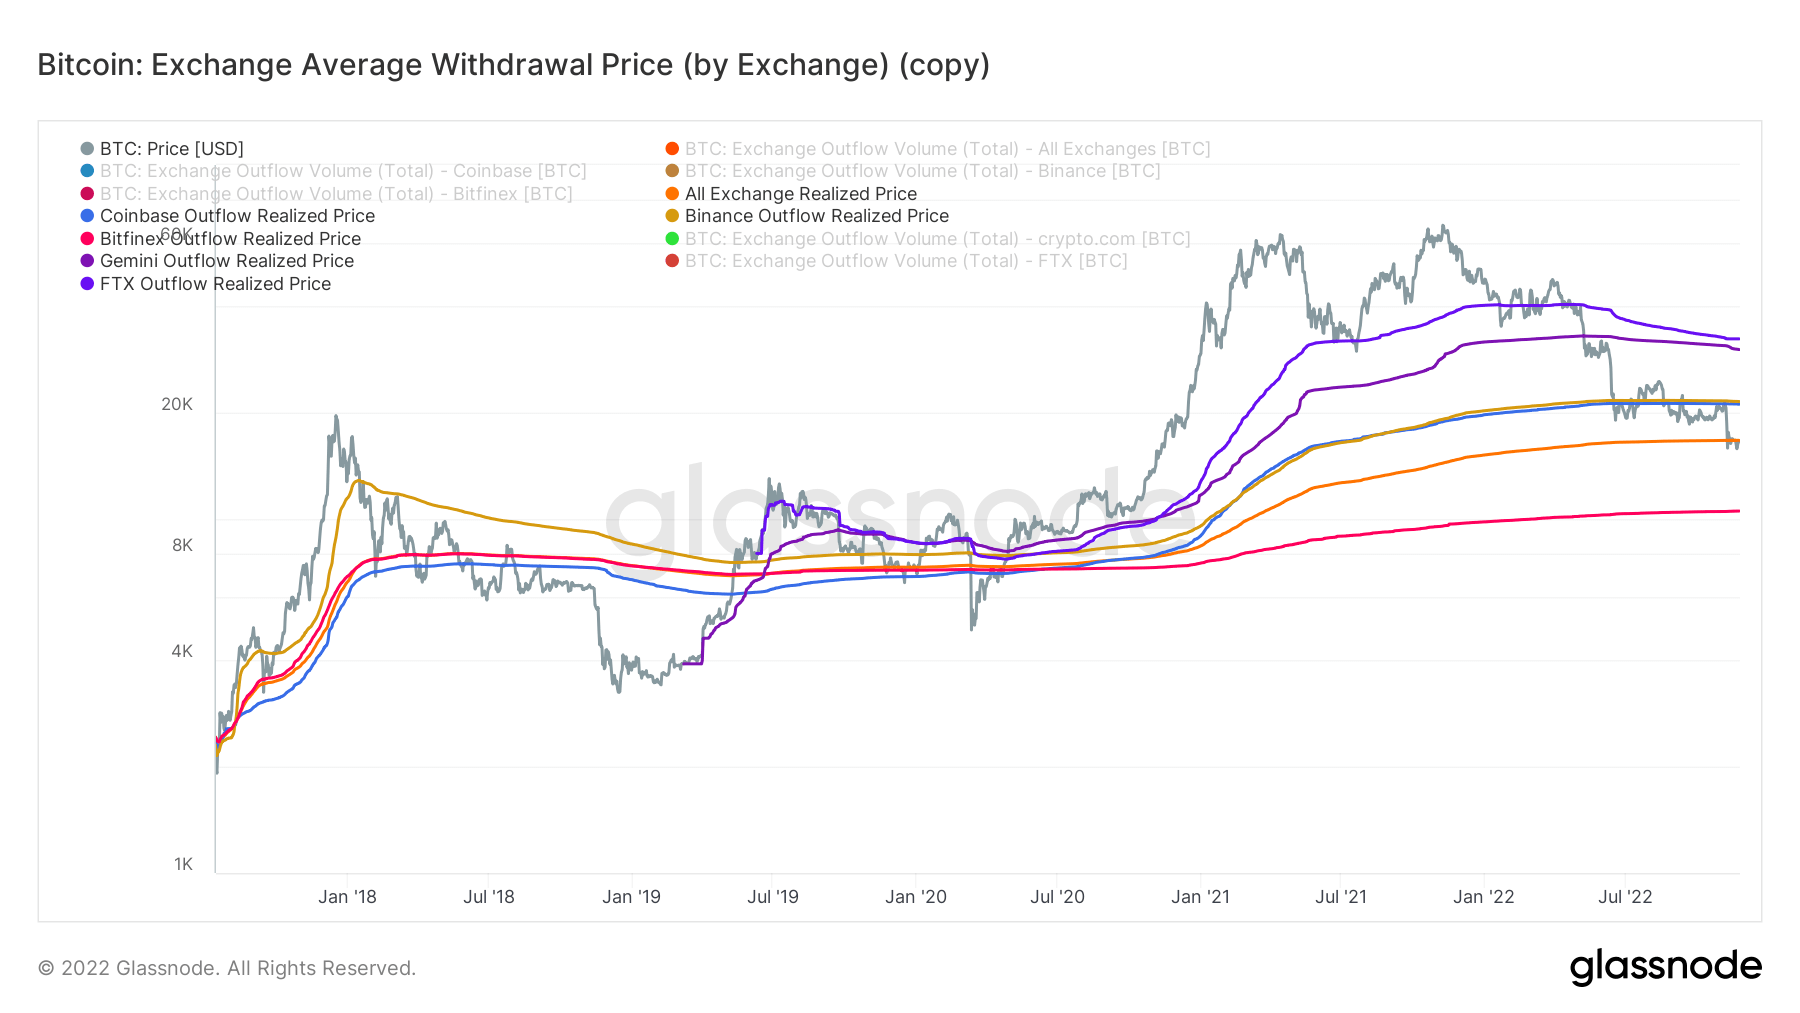 Average Bitcoin withdrawal price across exchanges